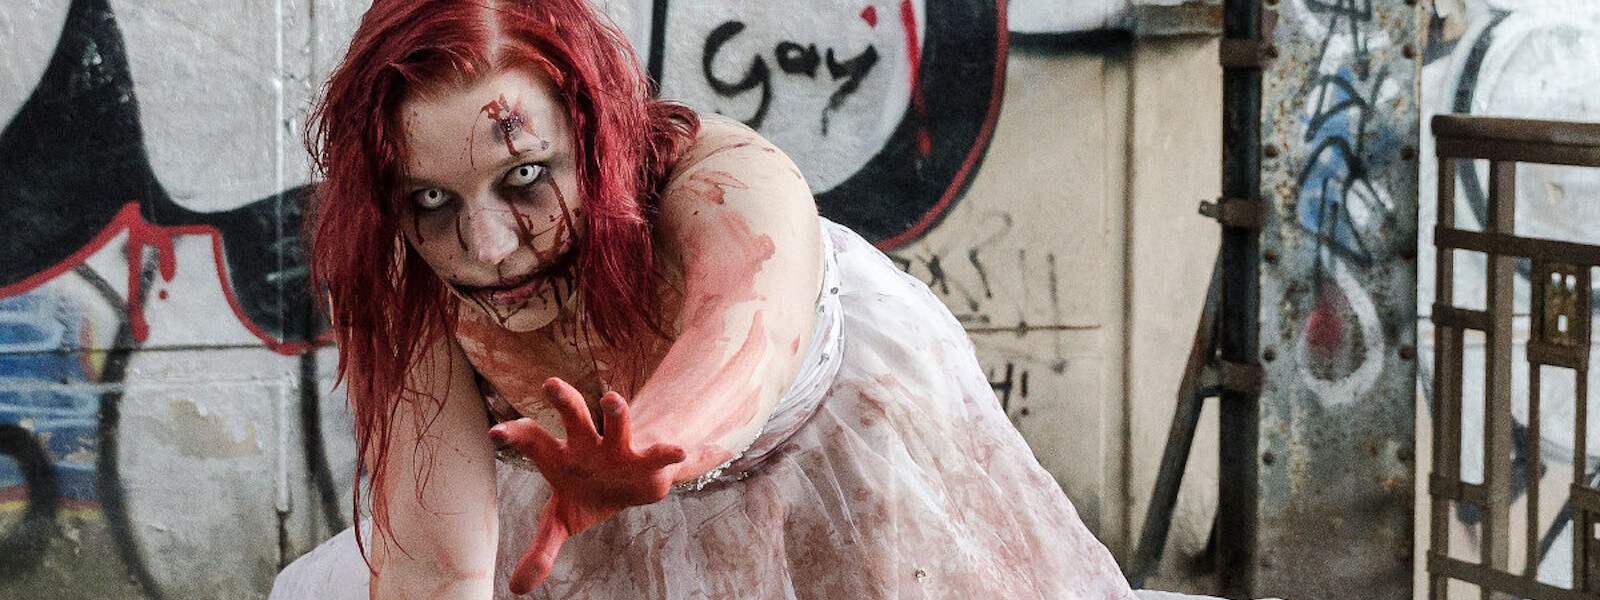 Red haired, bloody female Zombie in a wedding dress, reaching out.